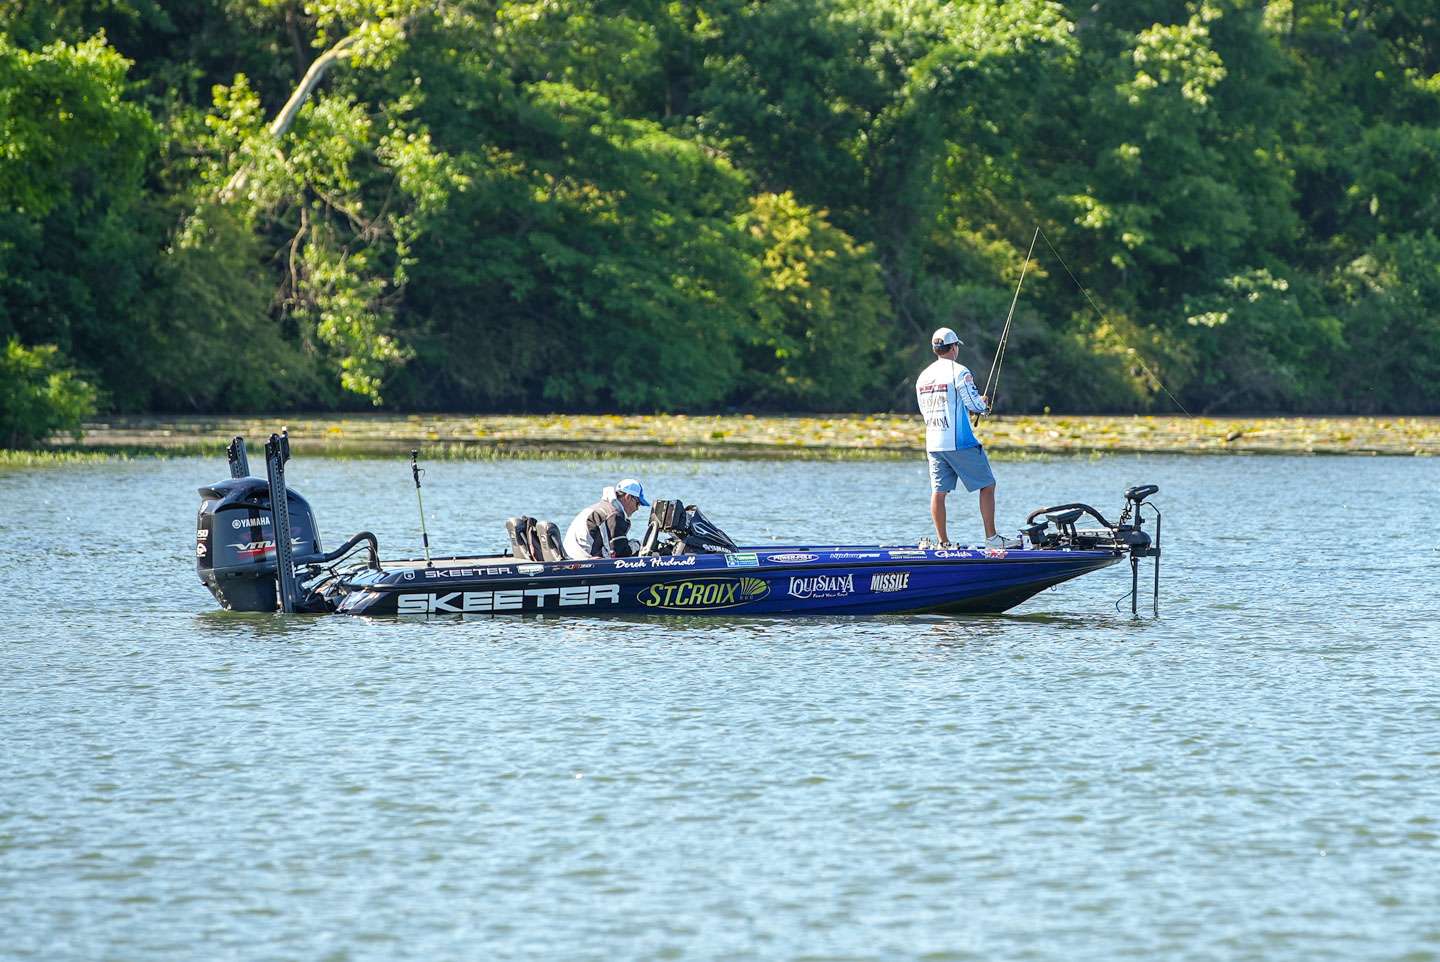 Catch up with Derek Hudnall and Luke Palmer as they get to work on the first day of the 2021 Berkley Bassmaster Elite at Lake Guntersville!
